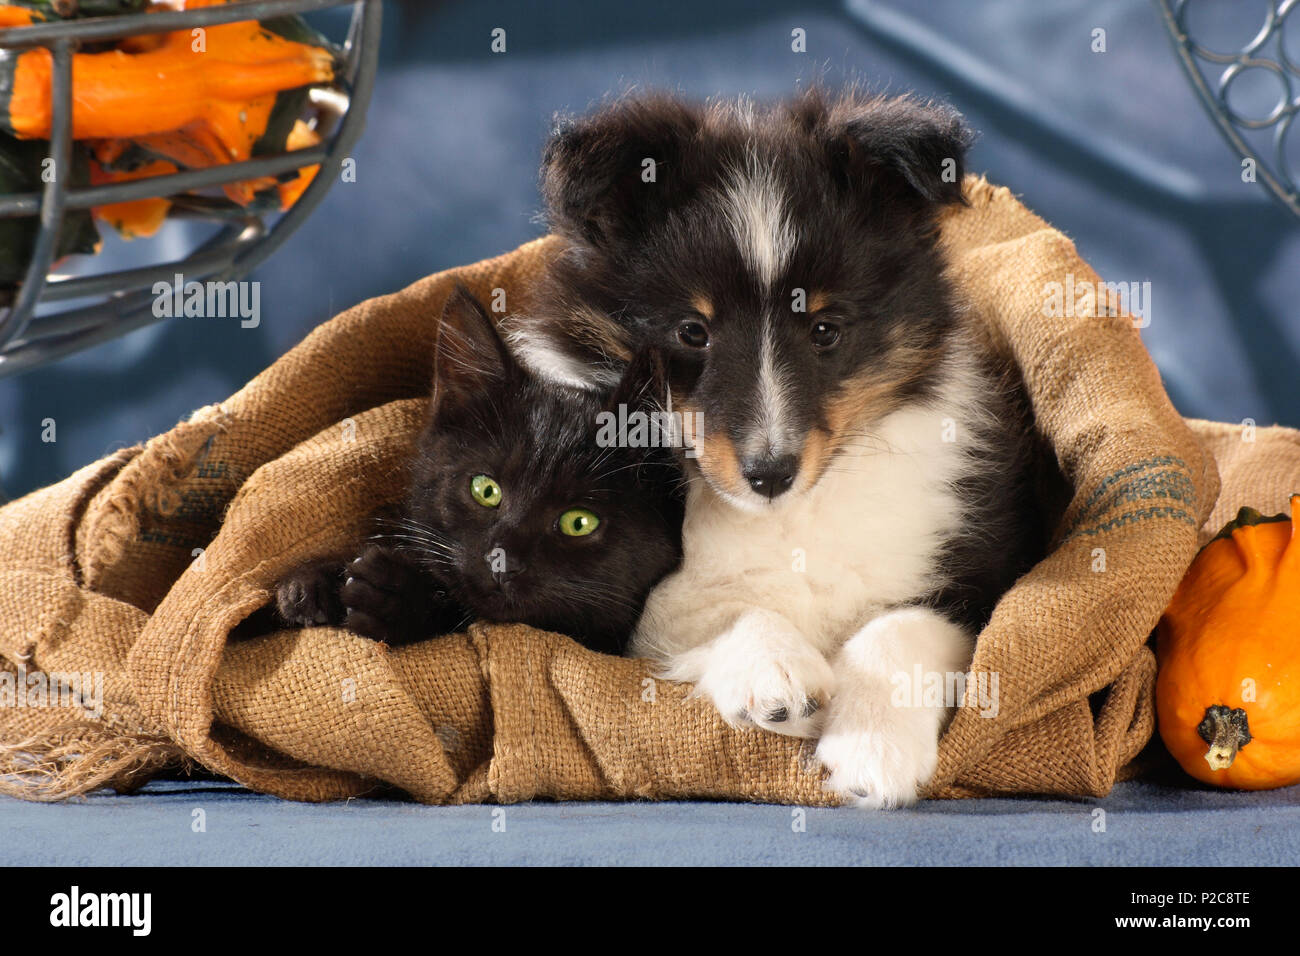 sheltie puppy (tricolor) and black kitten lying close together in a jute sack Stock Photo